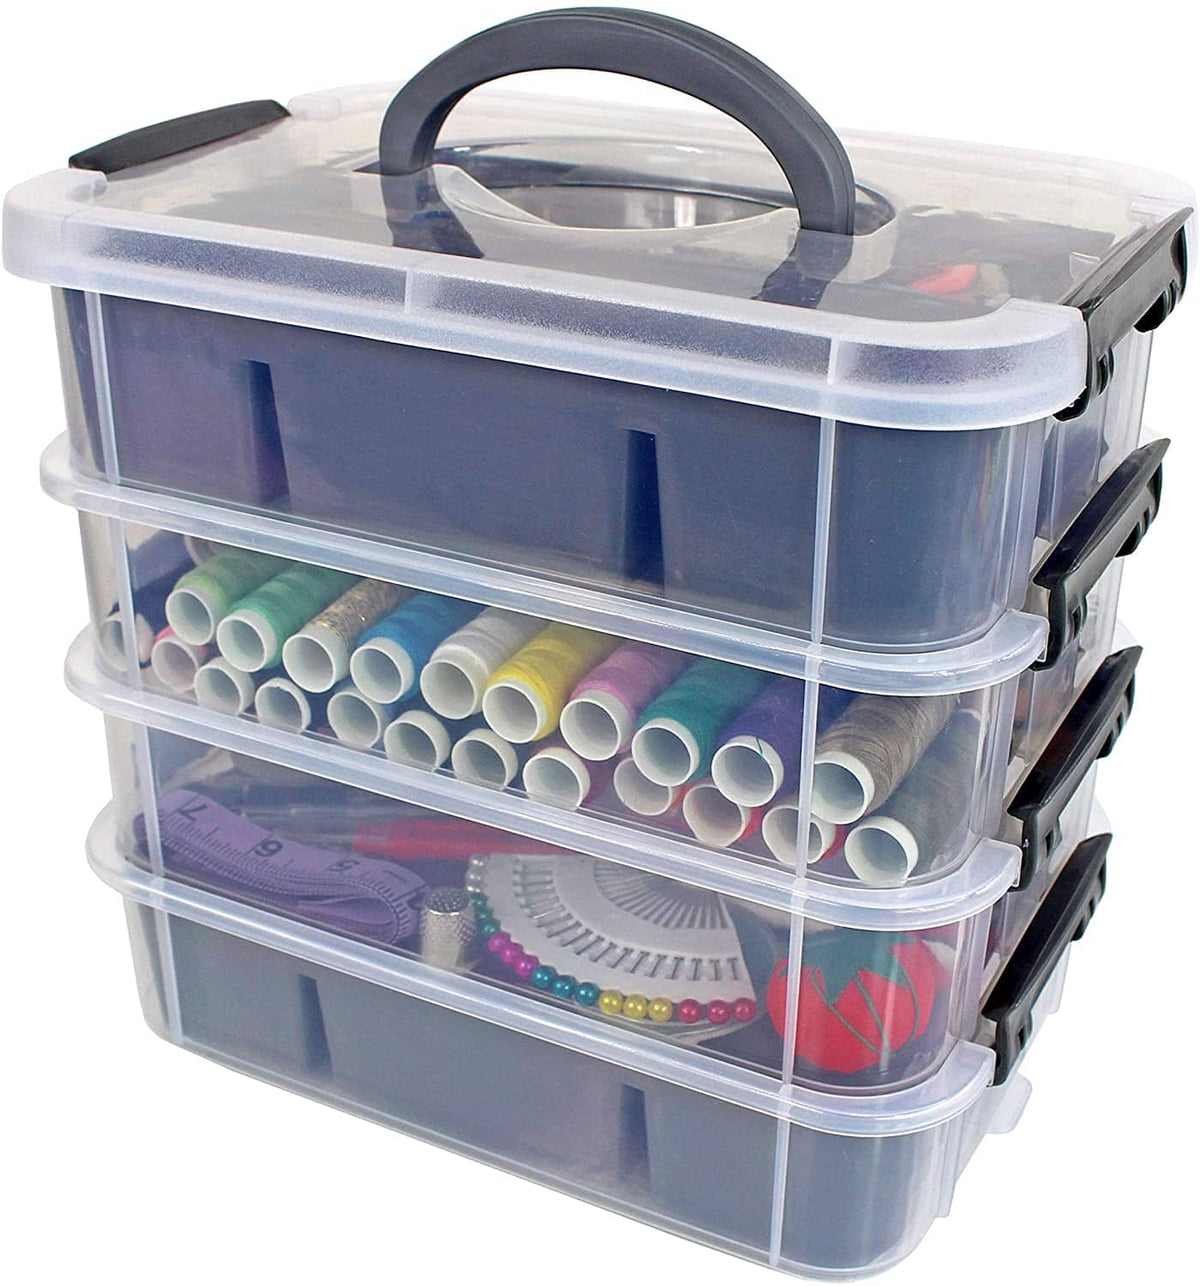 Bins & Things Stackable Storage Container - Gray - Craft Storage